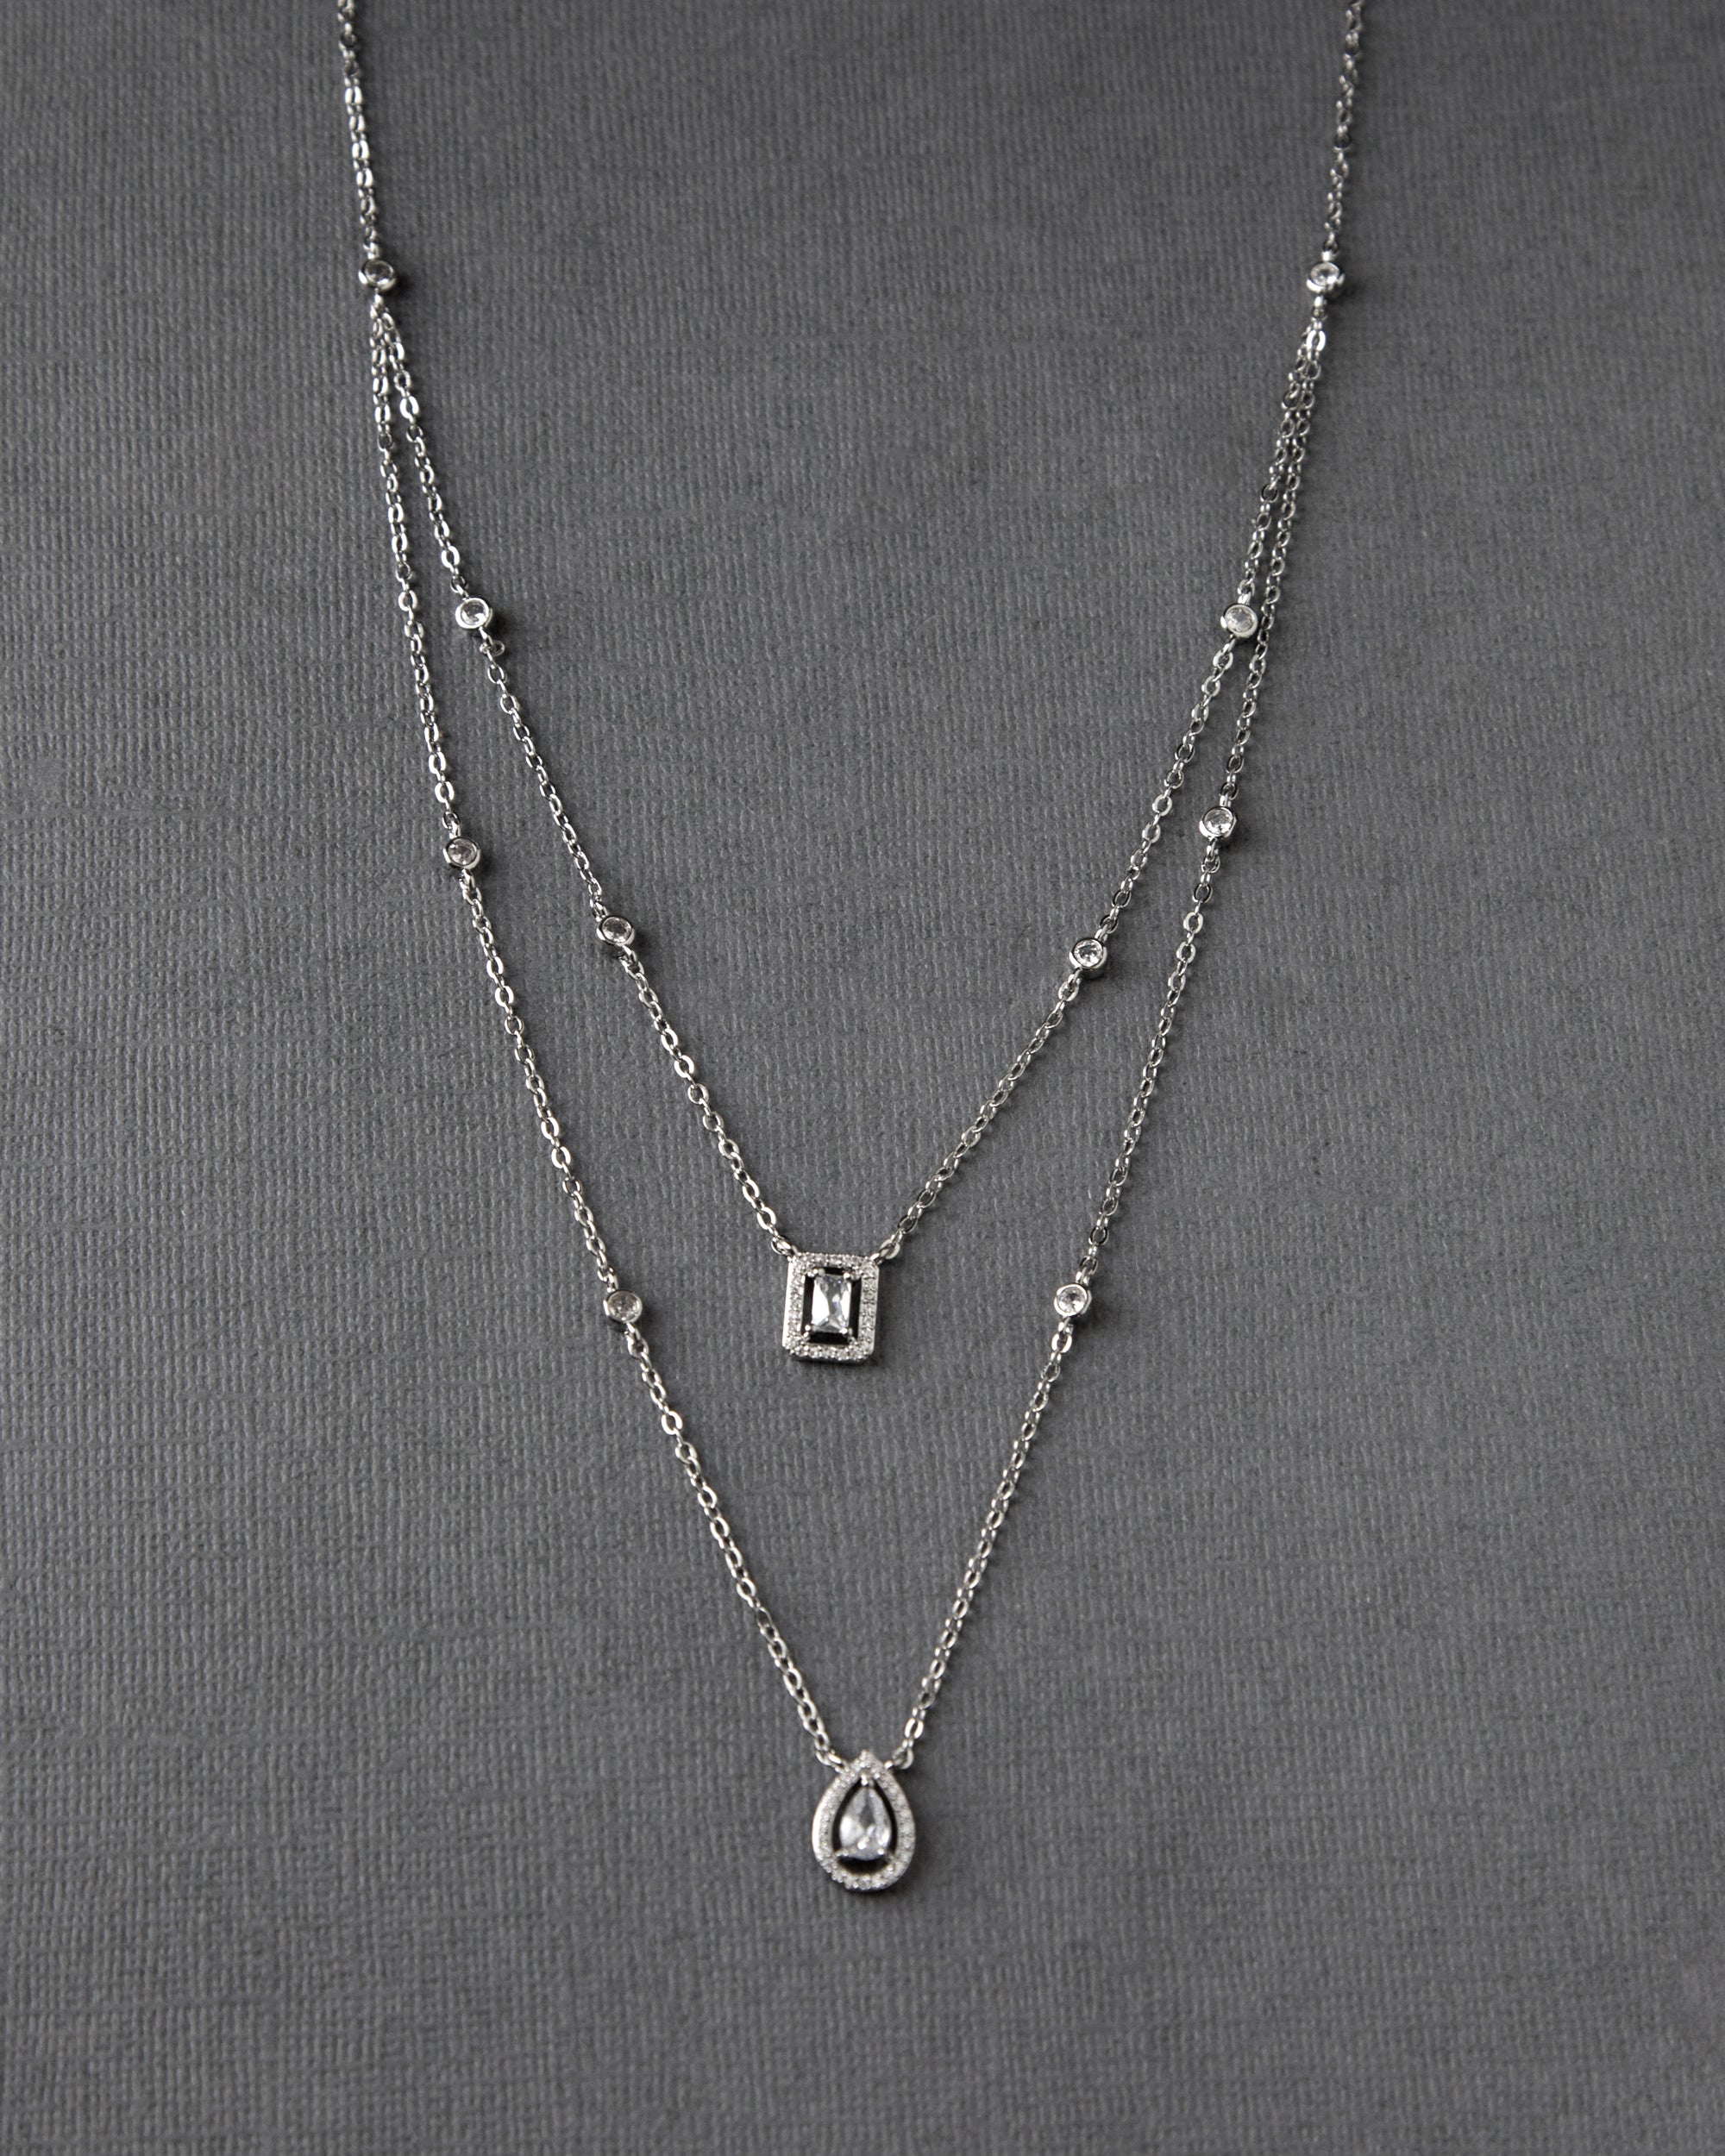 Simple Layered Necklace with CZ Stones - Cassandra Lynne